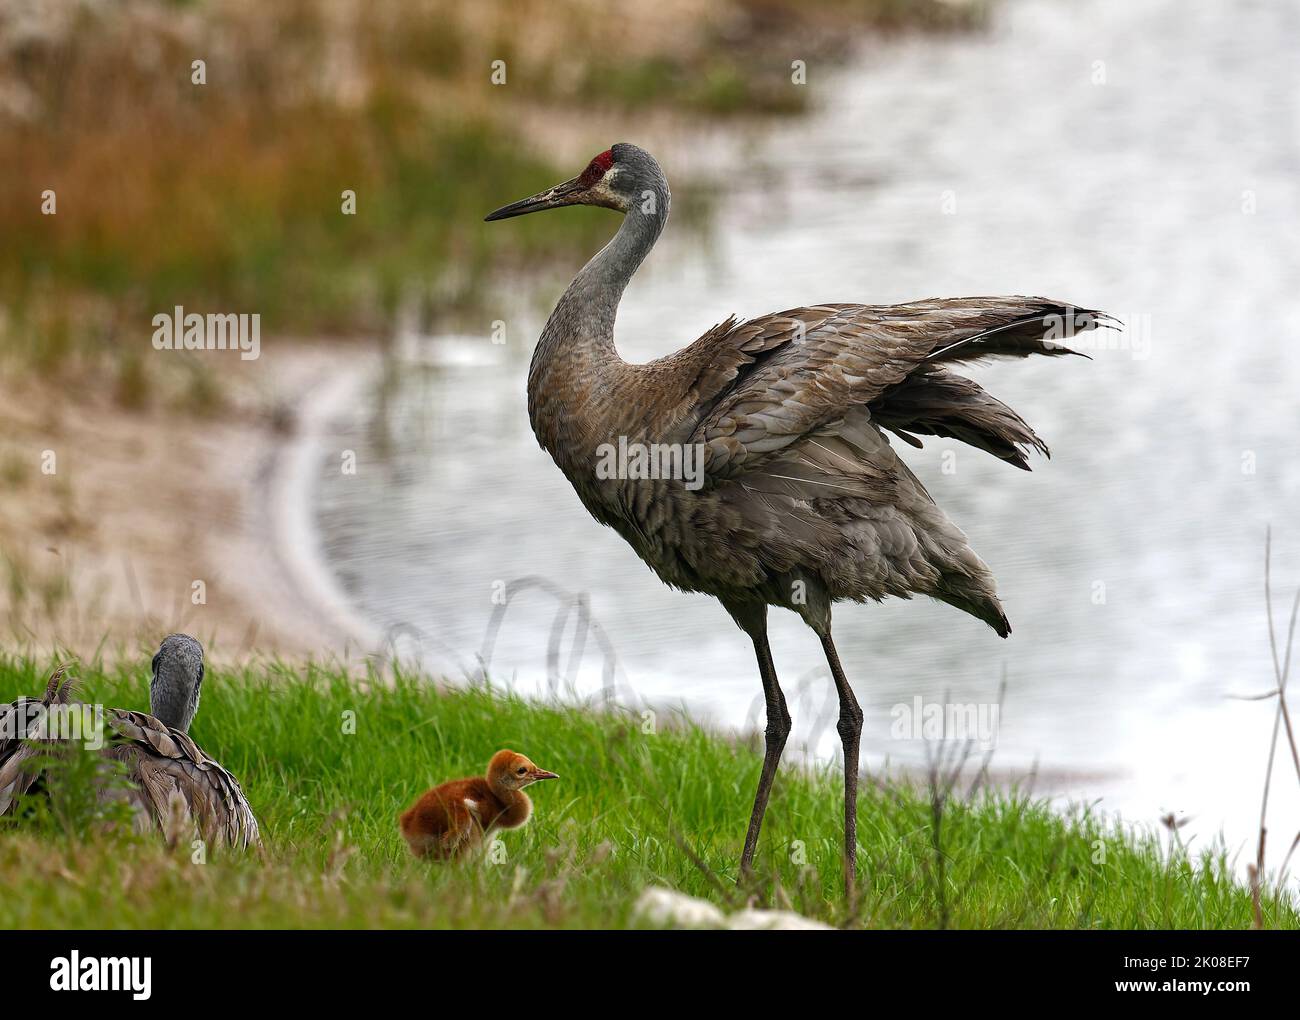 3 Sandhill cranes, adults, baby, standing, sitting, family, large birds, wildlife, animals, nature, green grass, pond, Grus canadensis; Florida, Venic Stock Photo